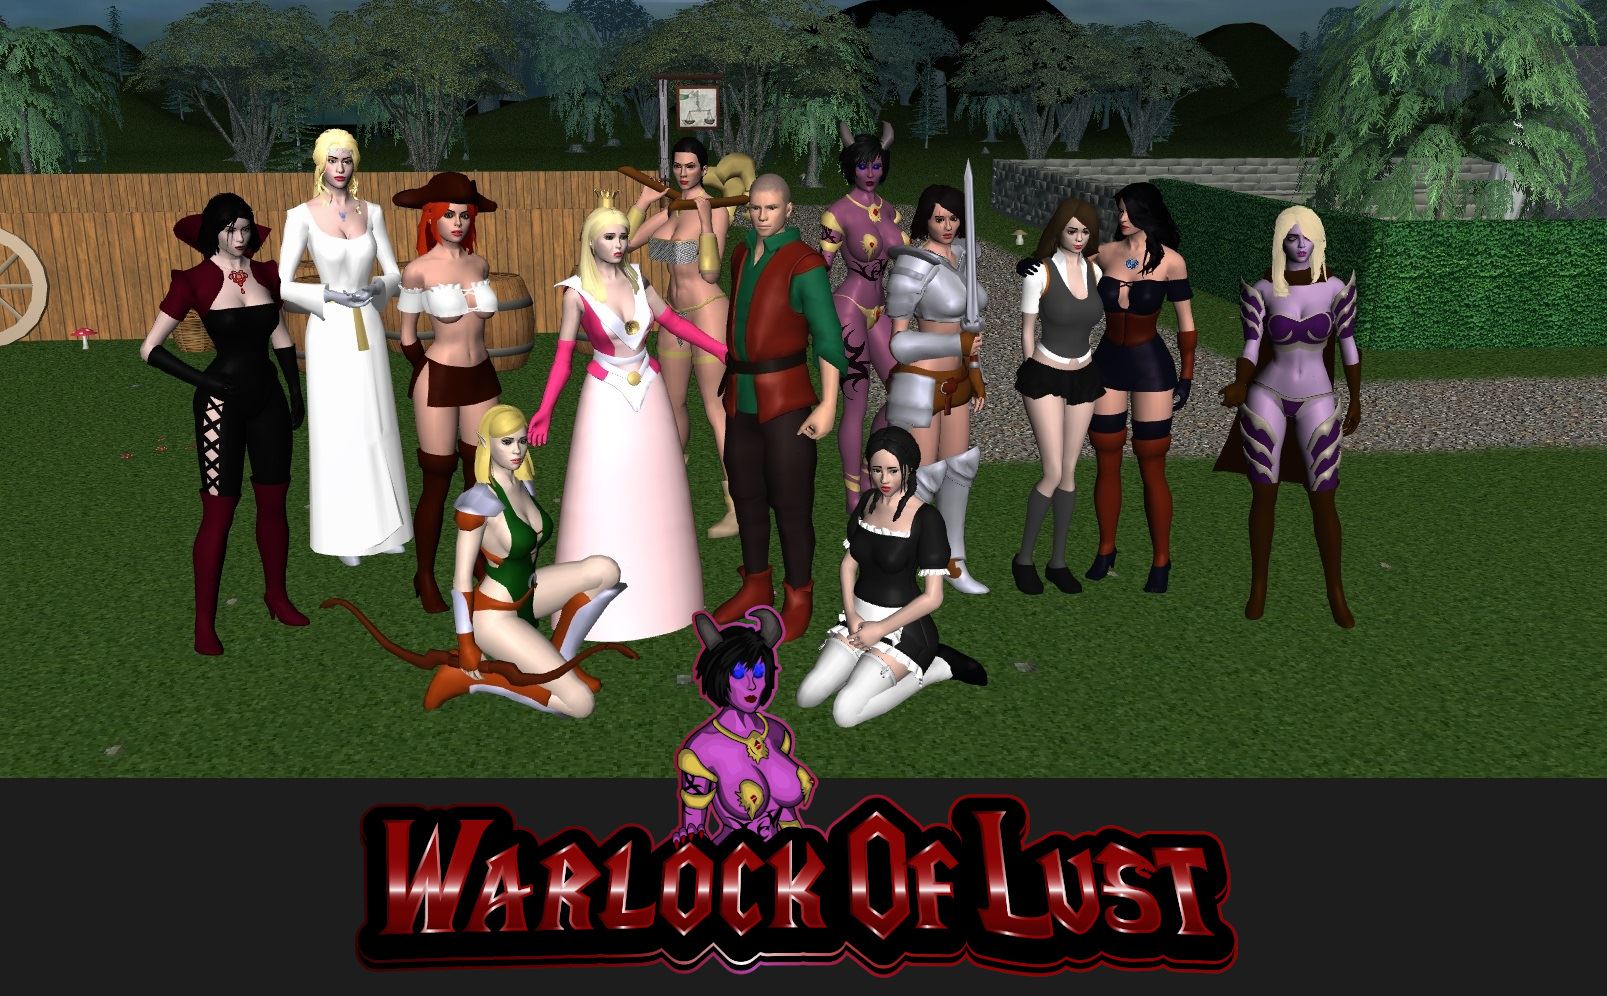 Warlock of Lust porn xxx game download cover